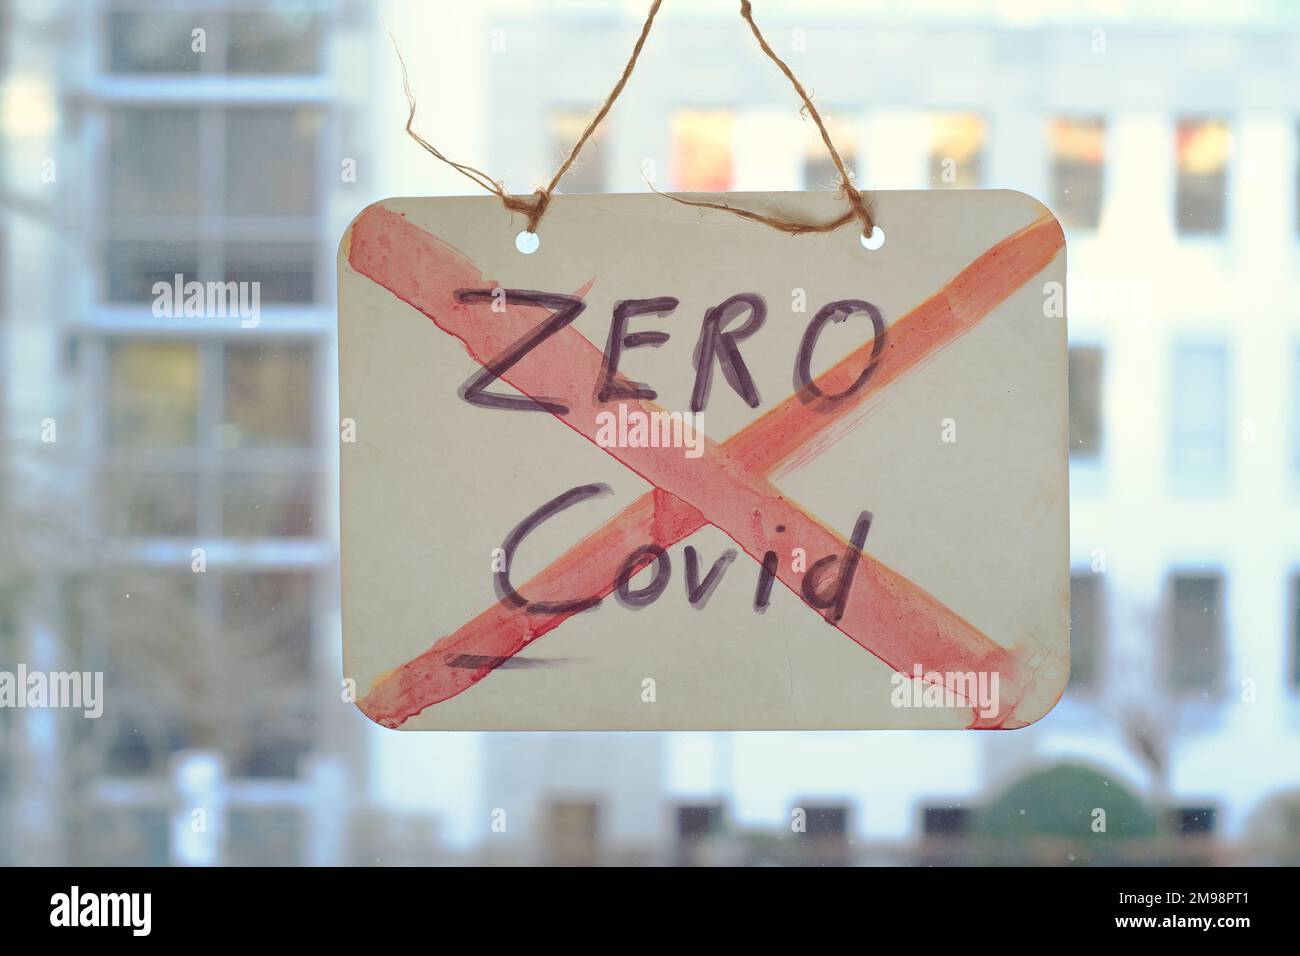 End Zero covid policy sign on window, office buildings in the back Stock Photo